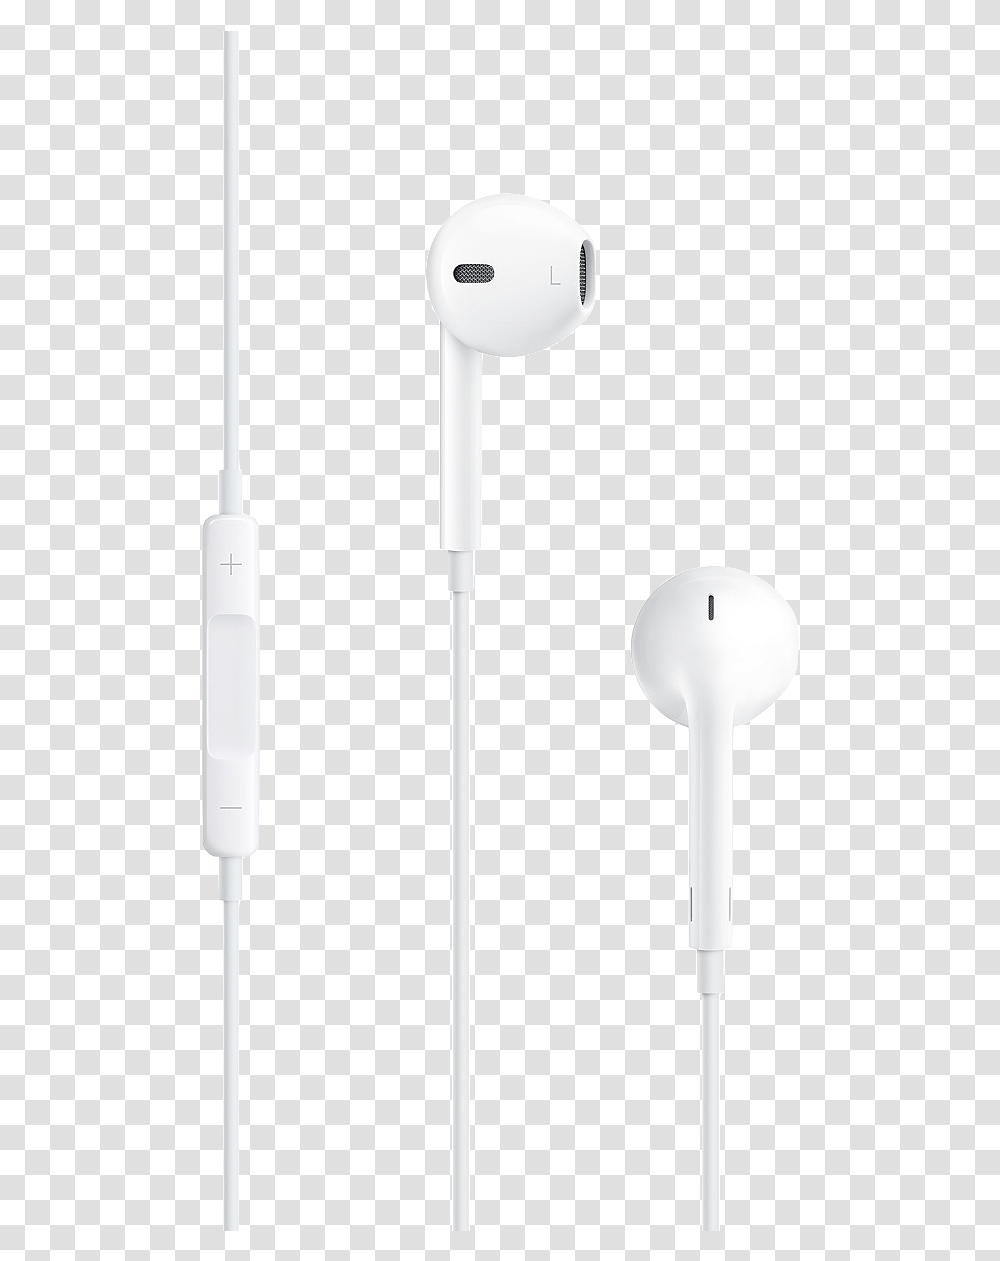 Microphone Airpods Apple Headphones Apple, Electronics, Headset, Adapter, Cable Transparent Png